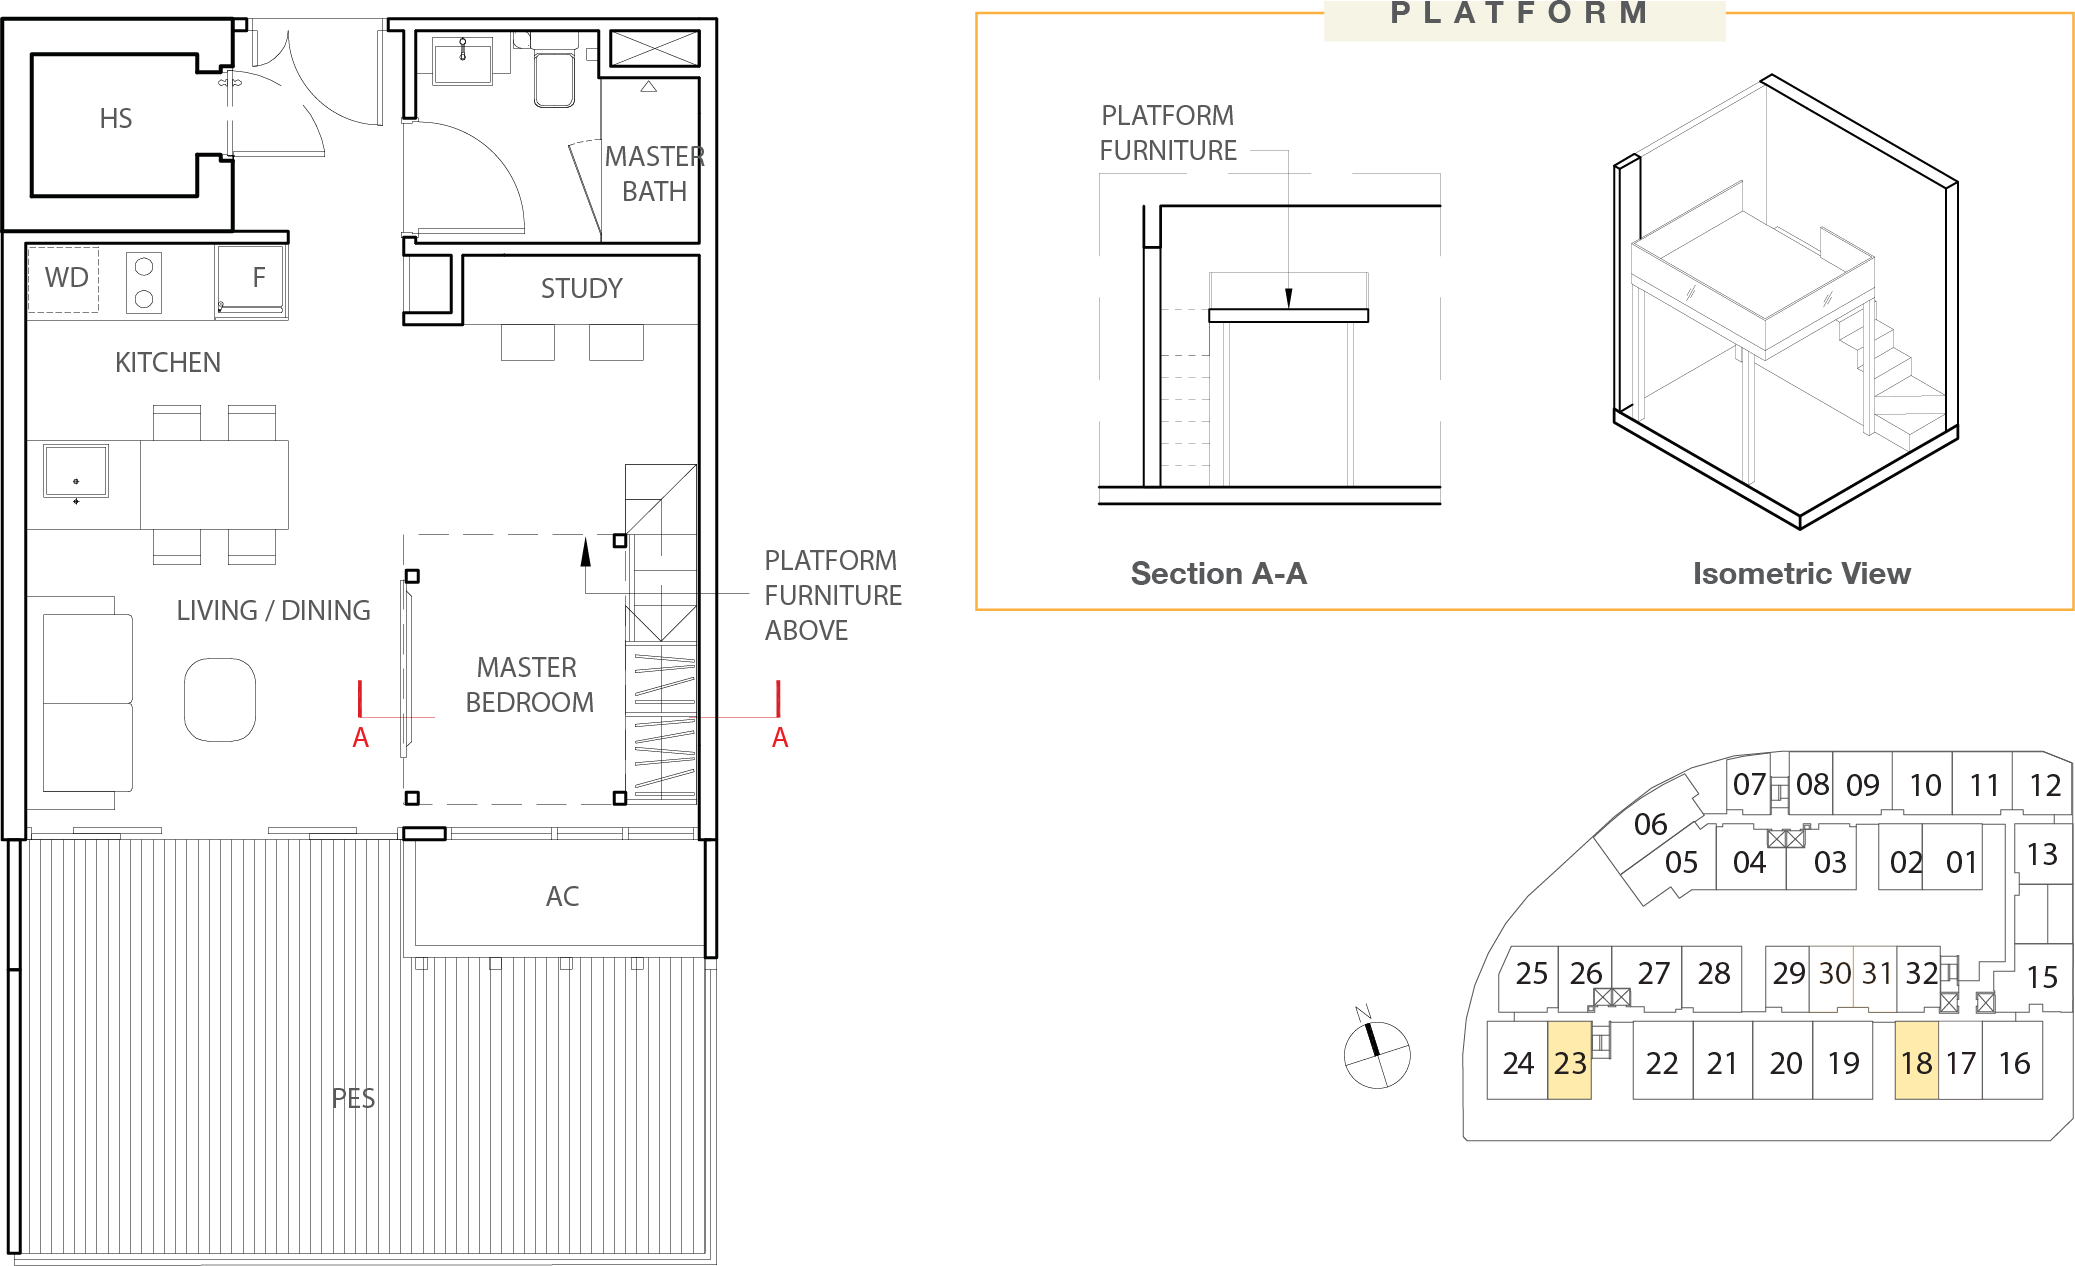 Floor Plan for Residential Type eA-a